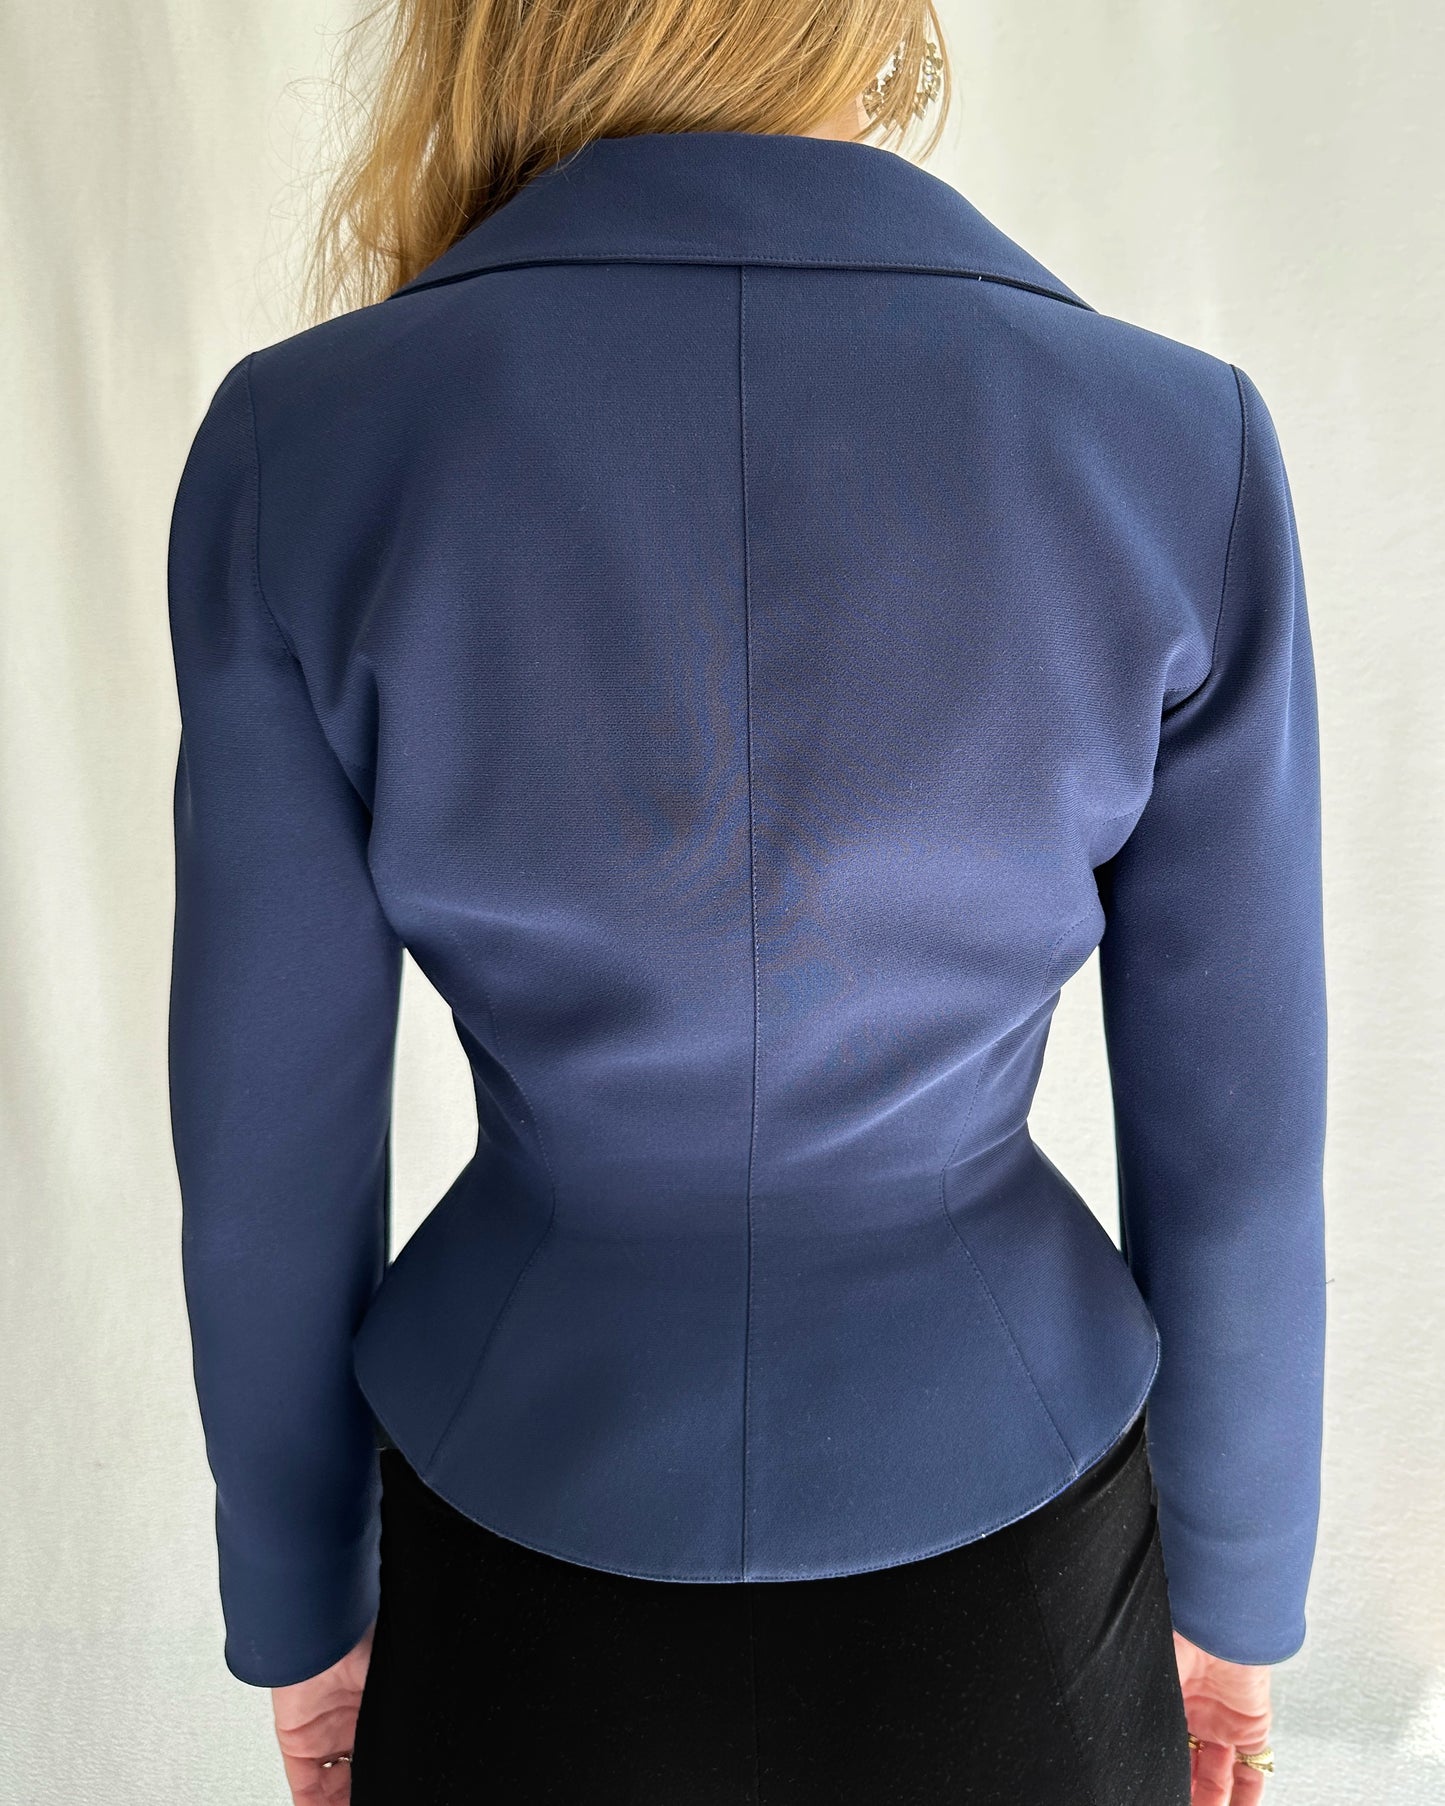 VINTAGE THIERRY MUGLER JACKET with anchor accents, circa 1989